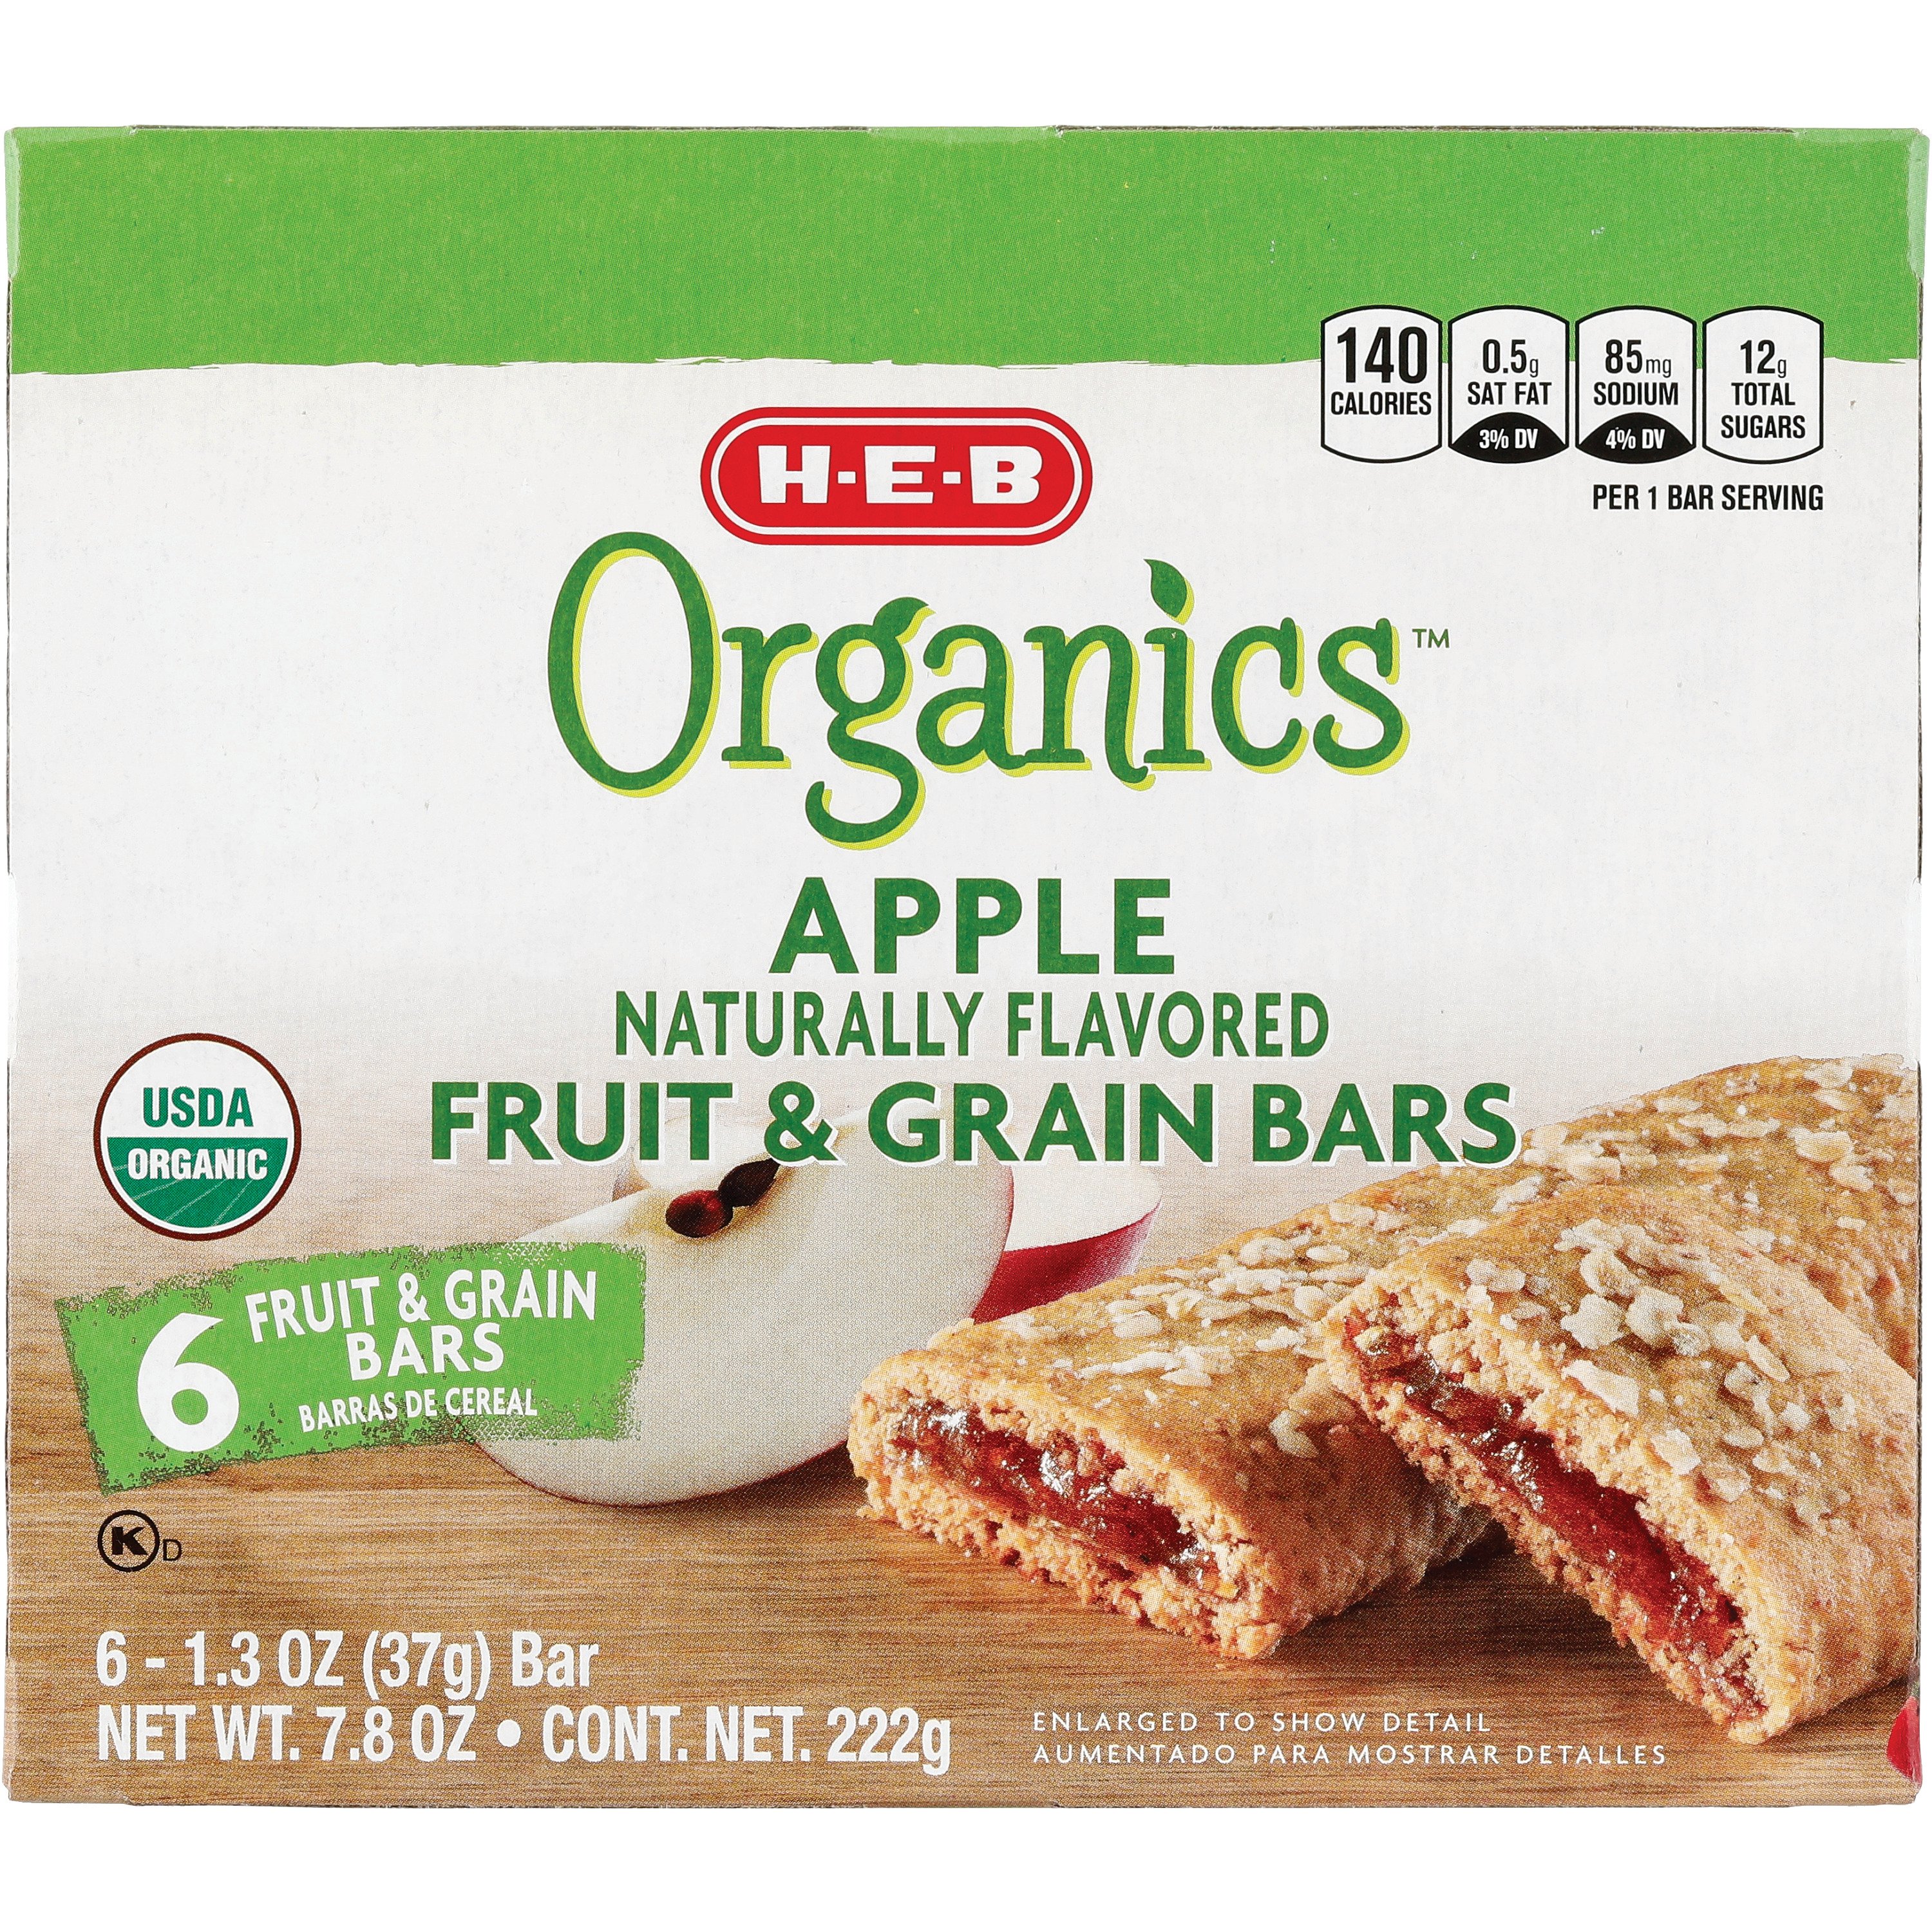 https://images.heb.com/is/image/HEBGrocery/002996513-1